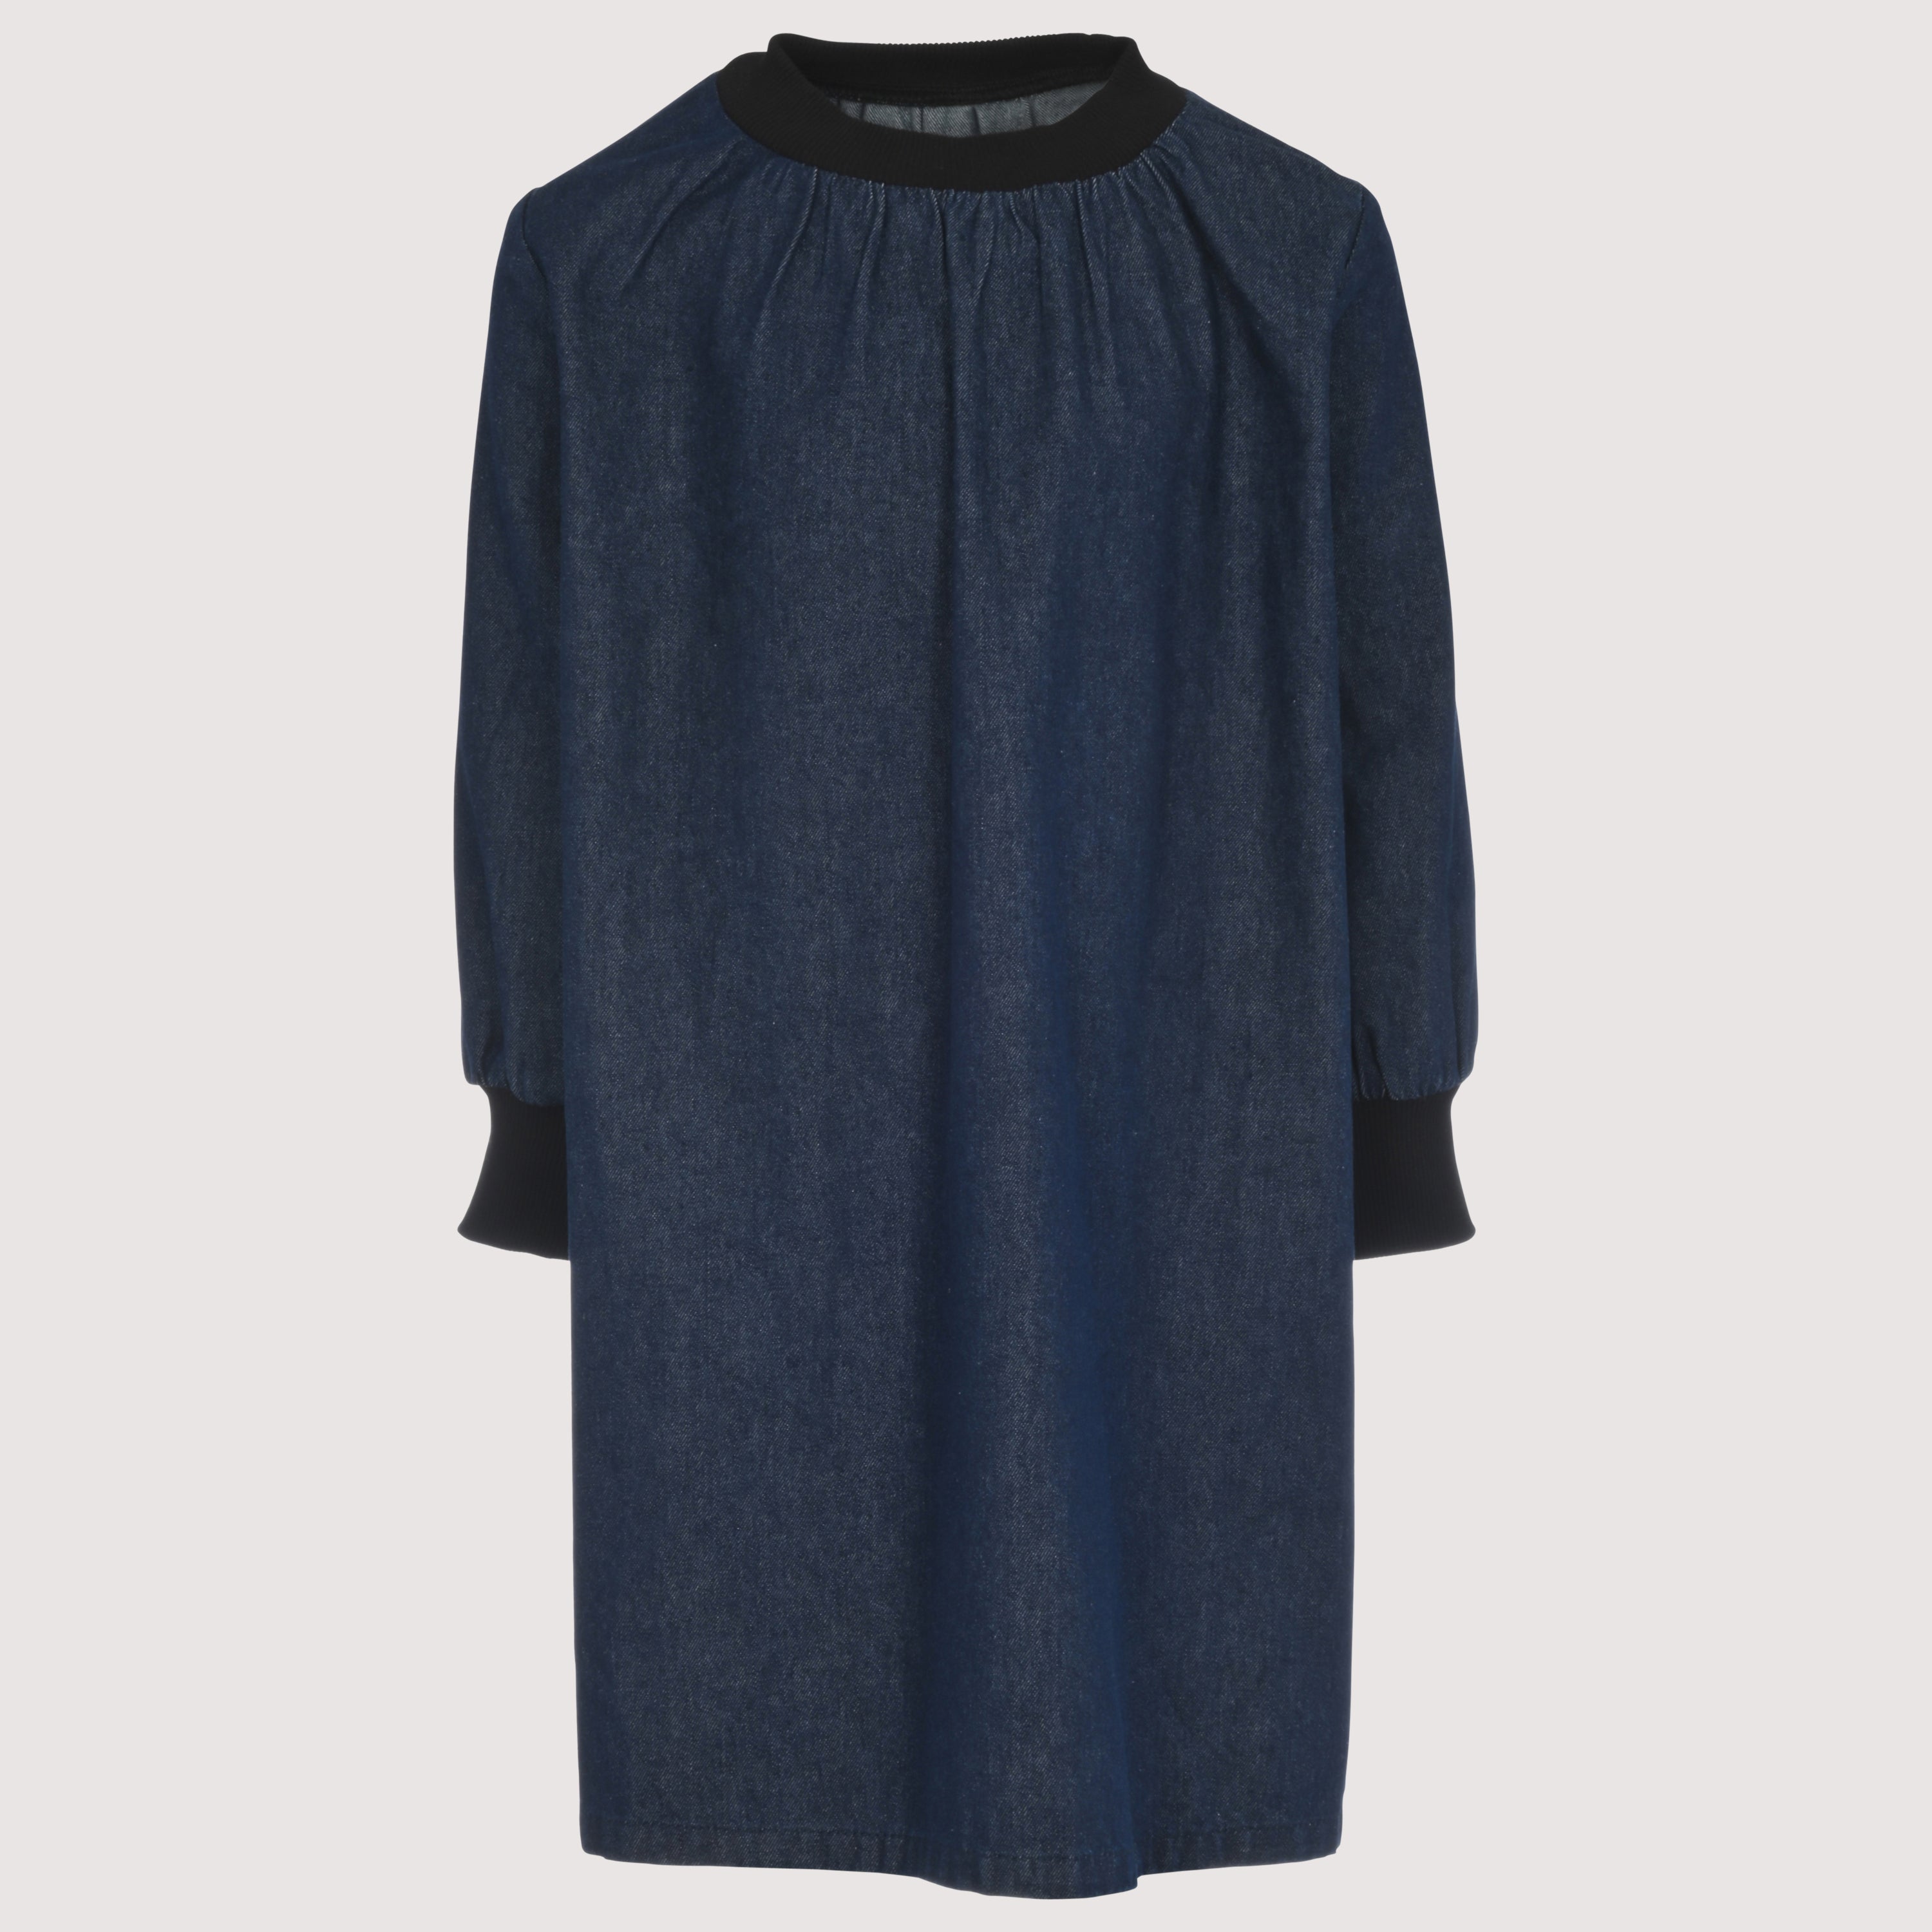 PHIL AND PHOEBE LANETT CONTRAST CUFF AND COLLAR DENIM DRESS